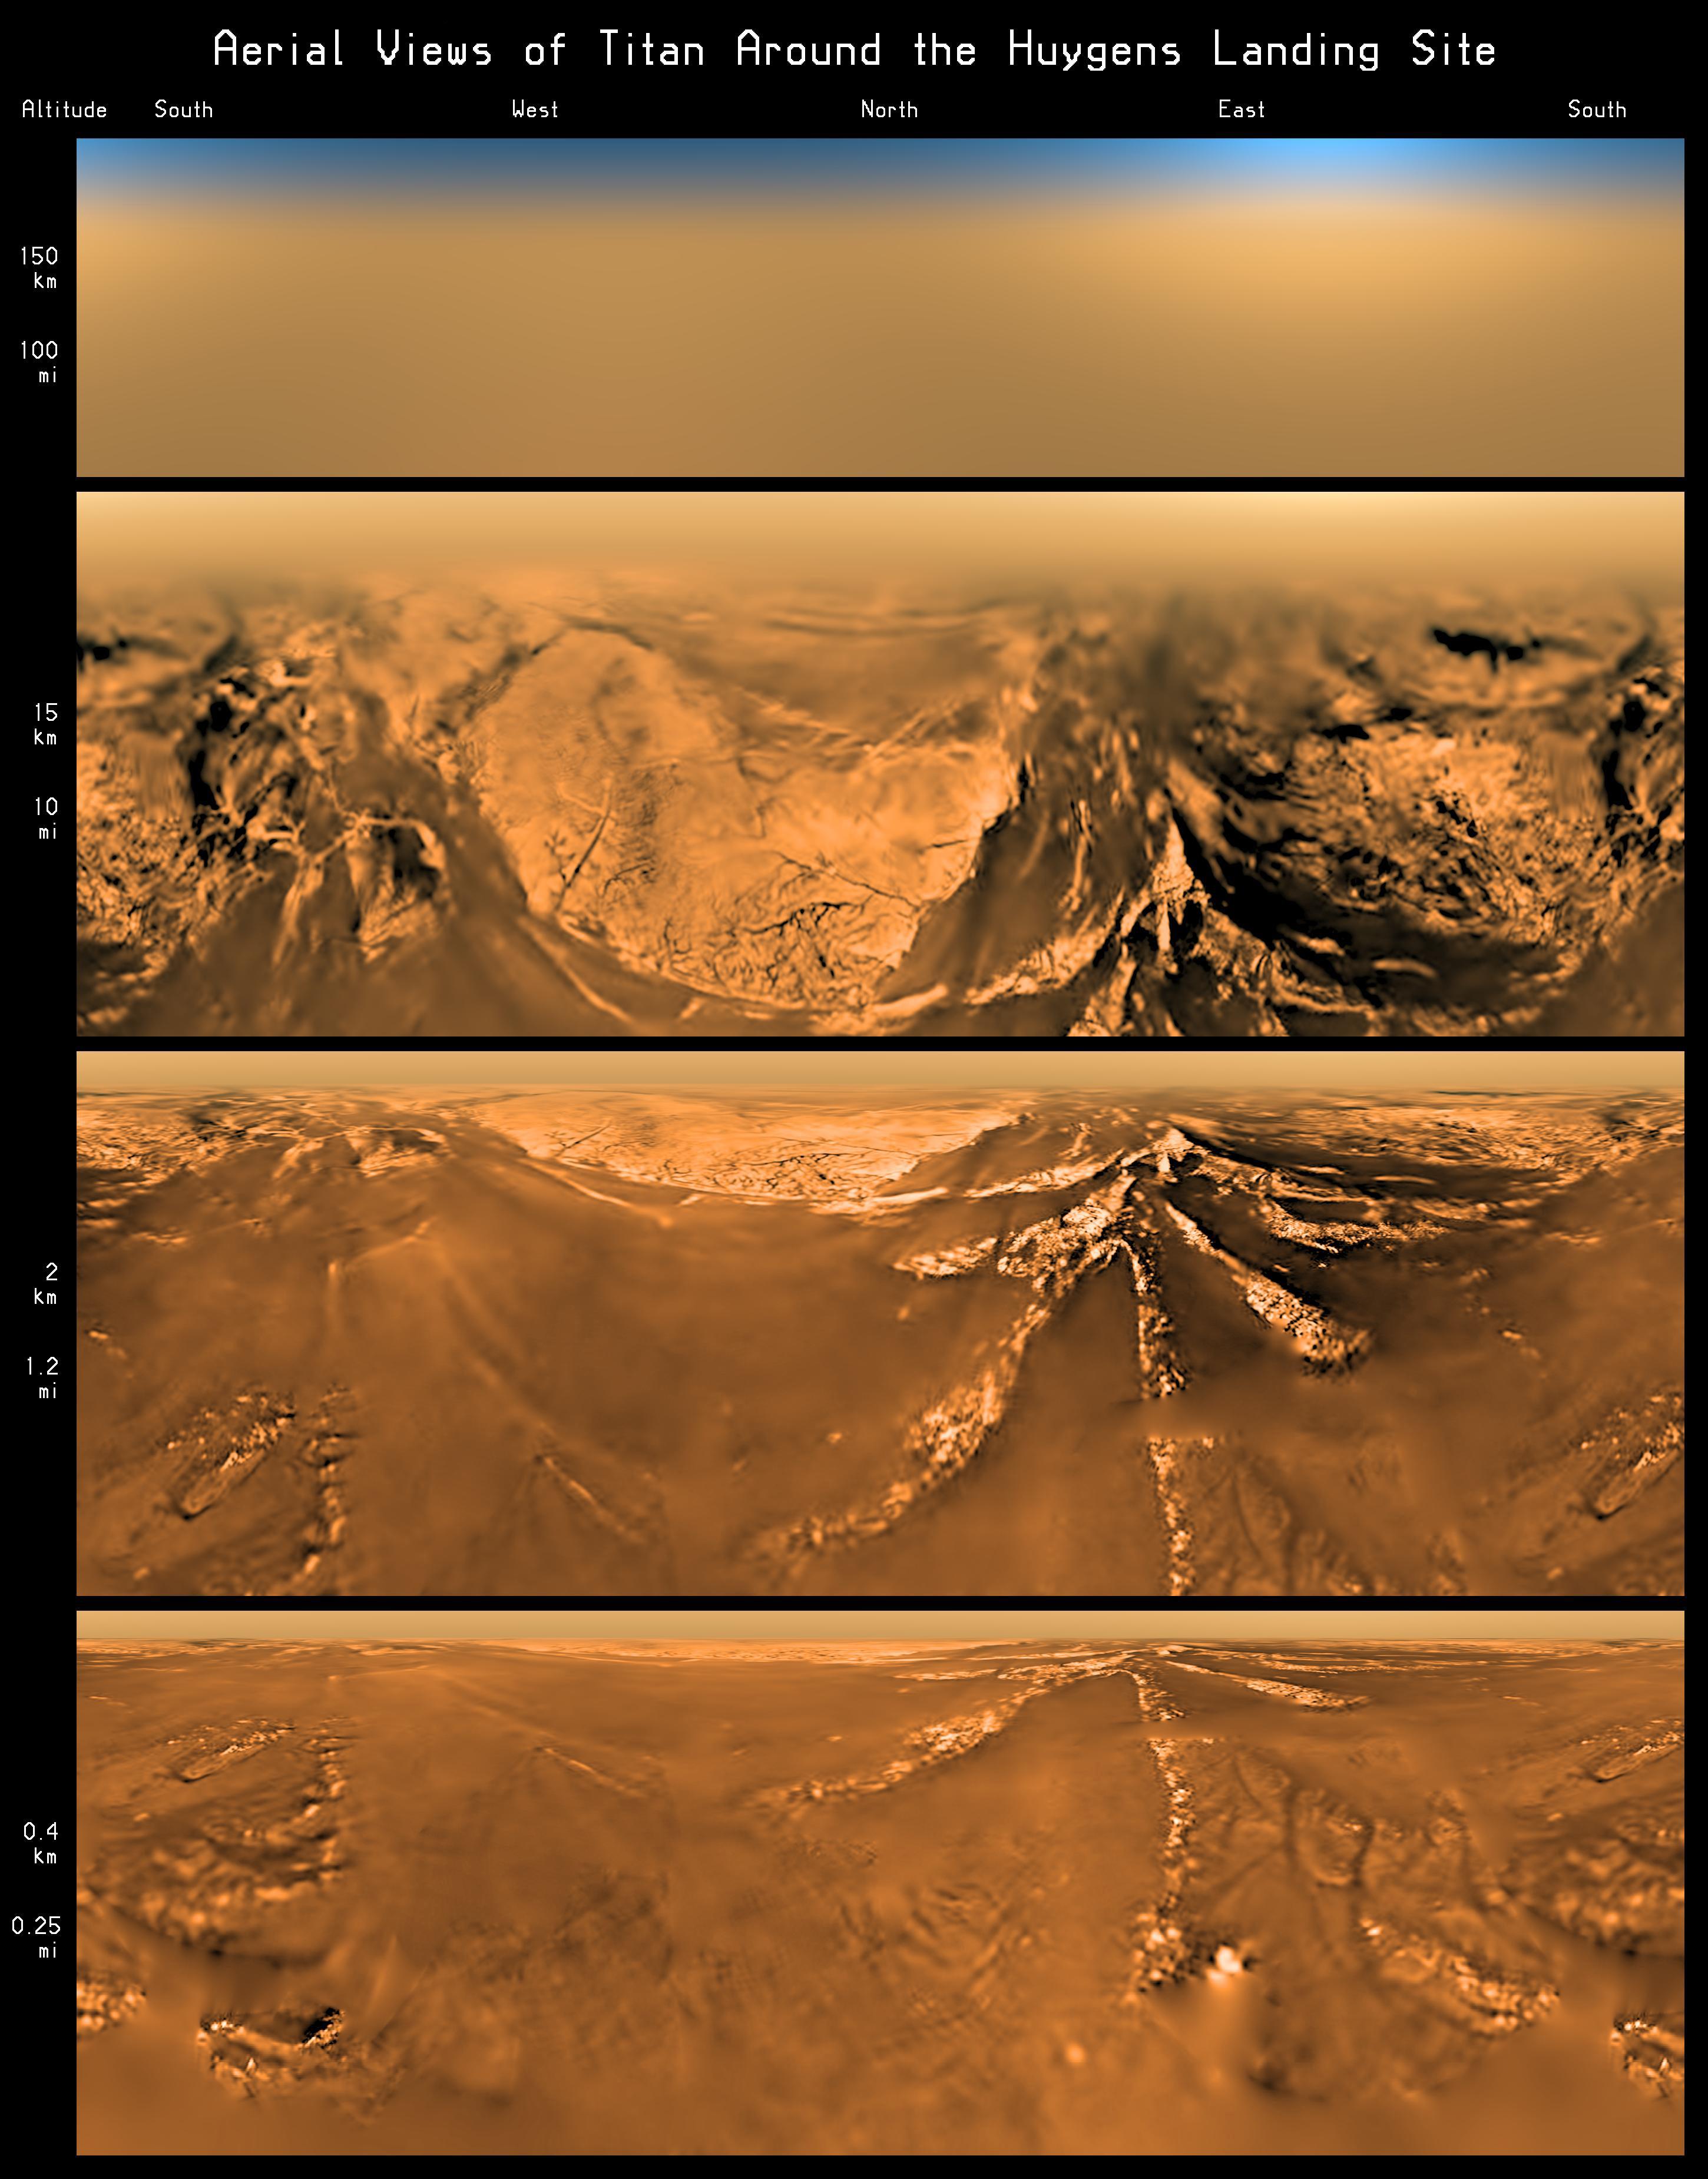 This poster shows a flattened (Mercator) projection of the view from Huygens at four different altitudes